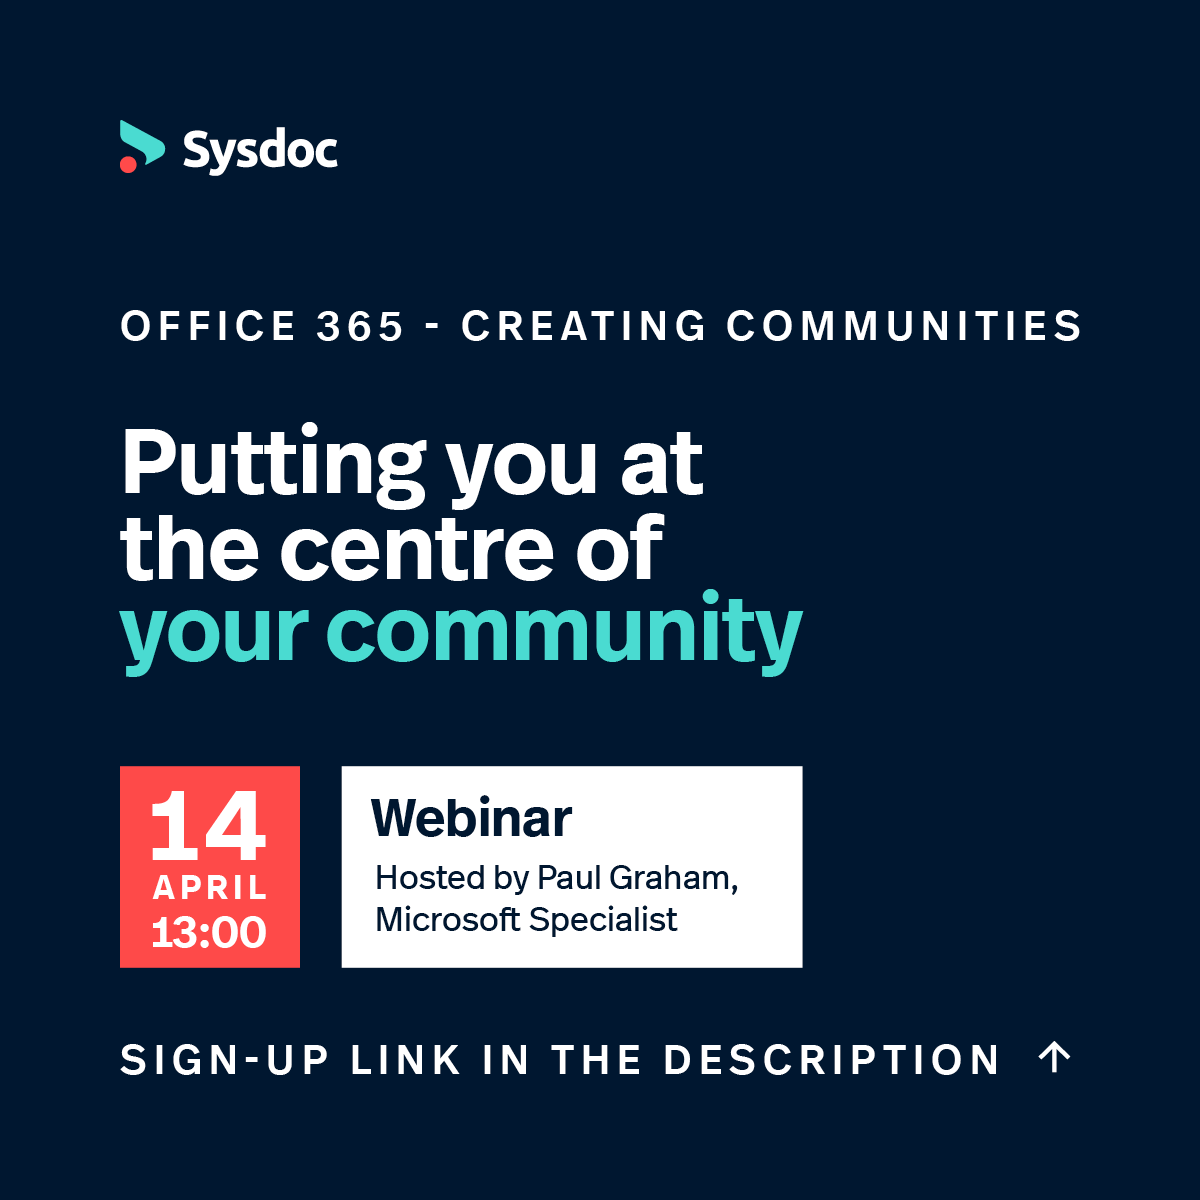 Join us on Thursday 14th April at 1pm for our creating communities webinar, hosted by Paul Graham. We'll be demonstrating how to use today's low-cost technologies to put you at the centre of your community. Sign up here bit.ly/36USxis